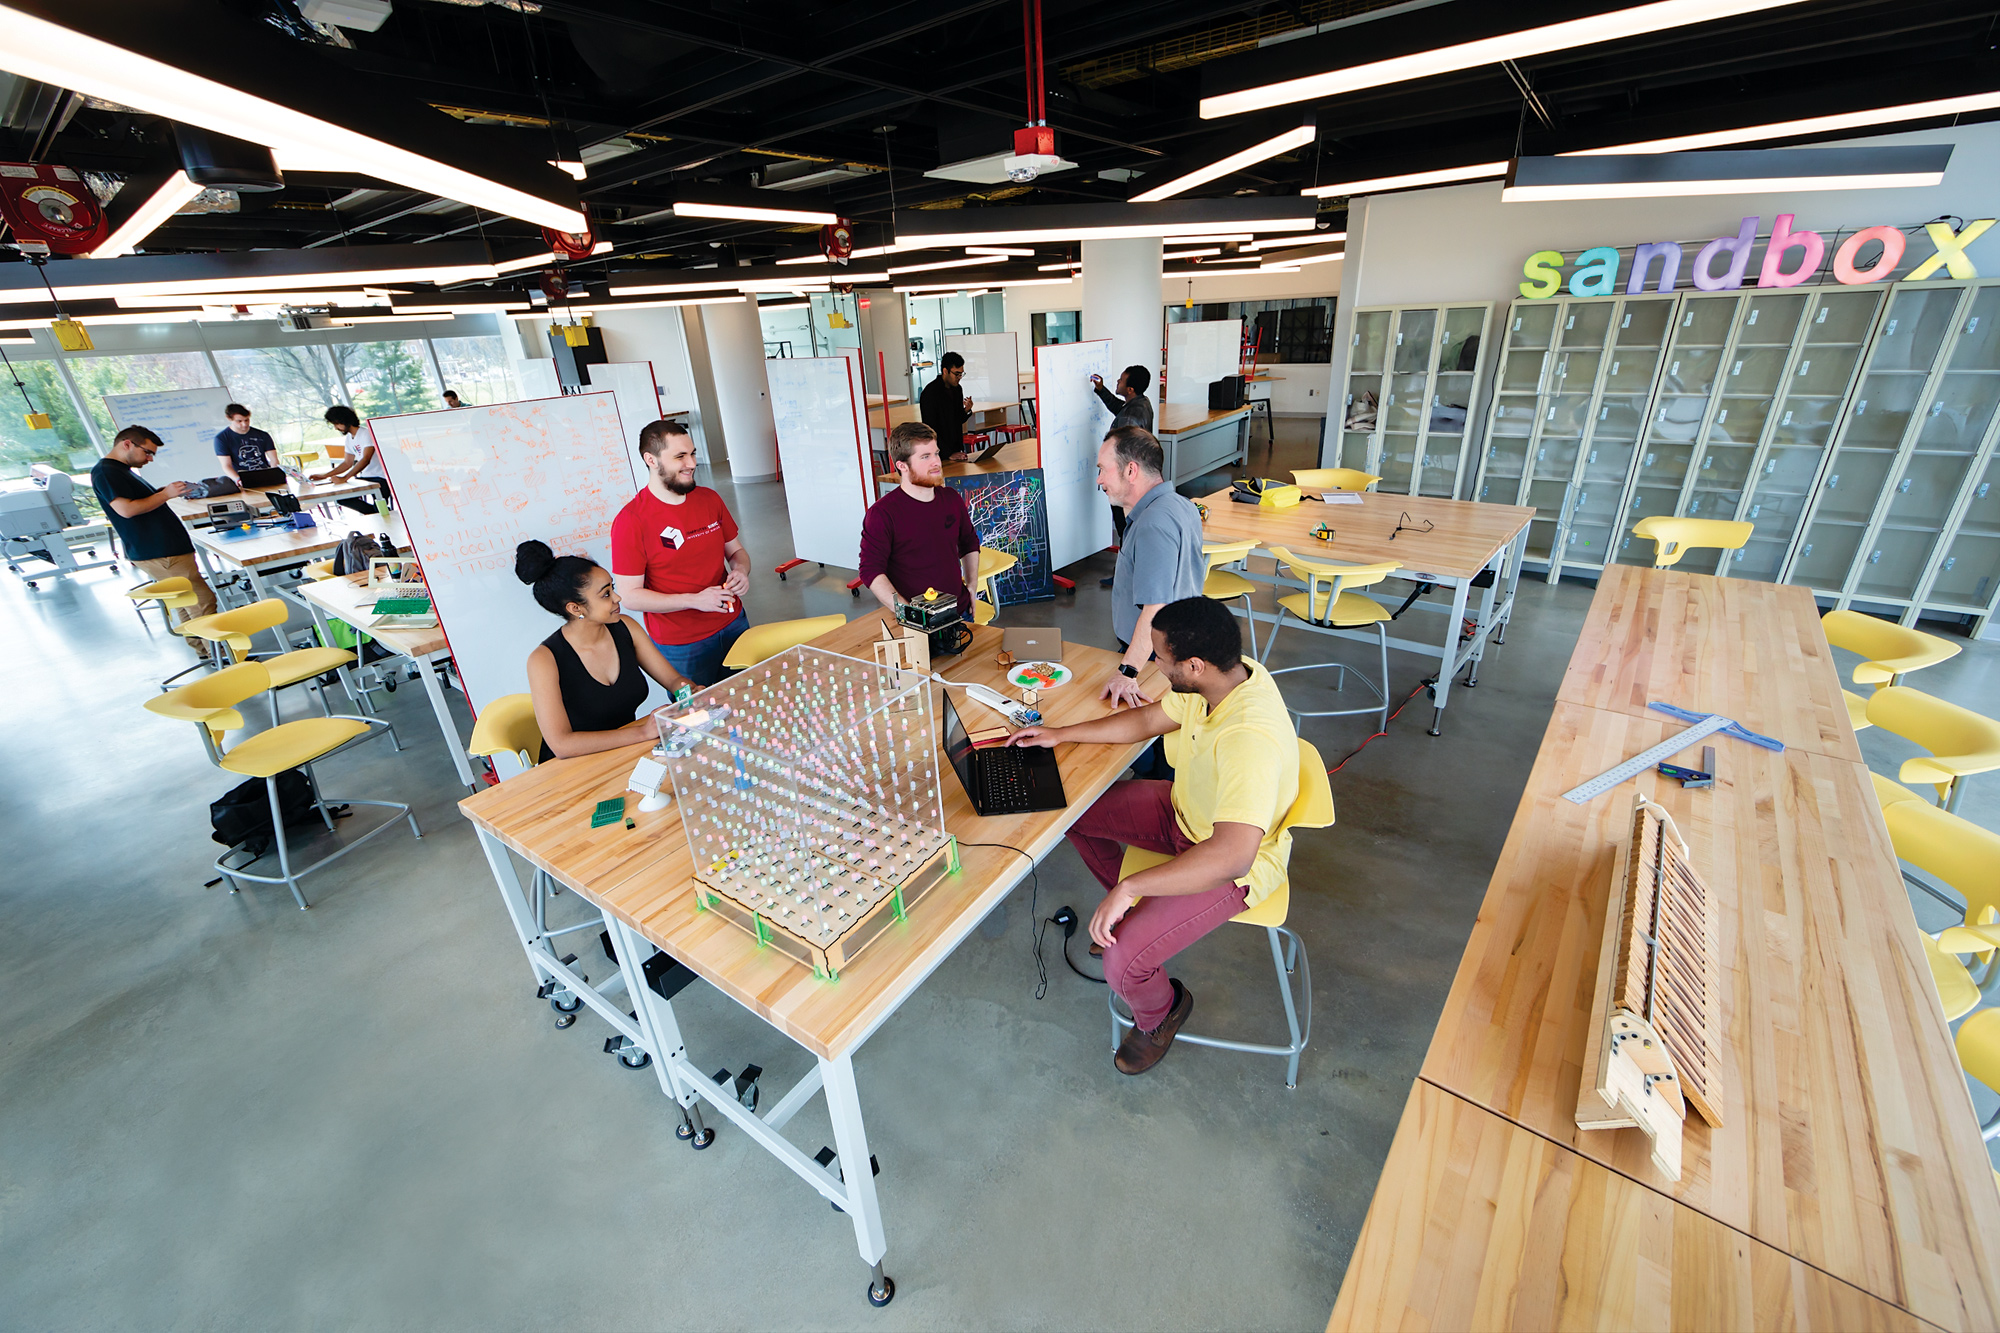 The Sandbox lab. A group of students and a professor are gathered around a table while other students work in the background. It is a very large open floorspace with a high ceiling, large windows, shelves and equipment.